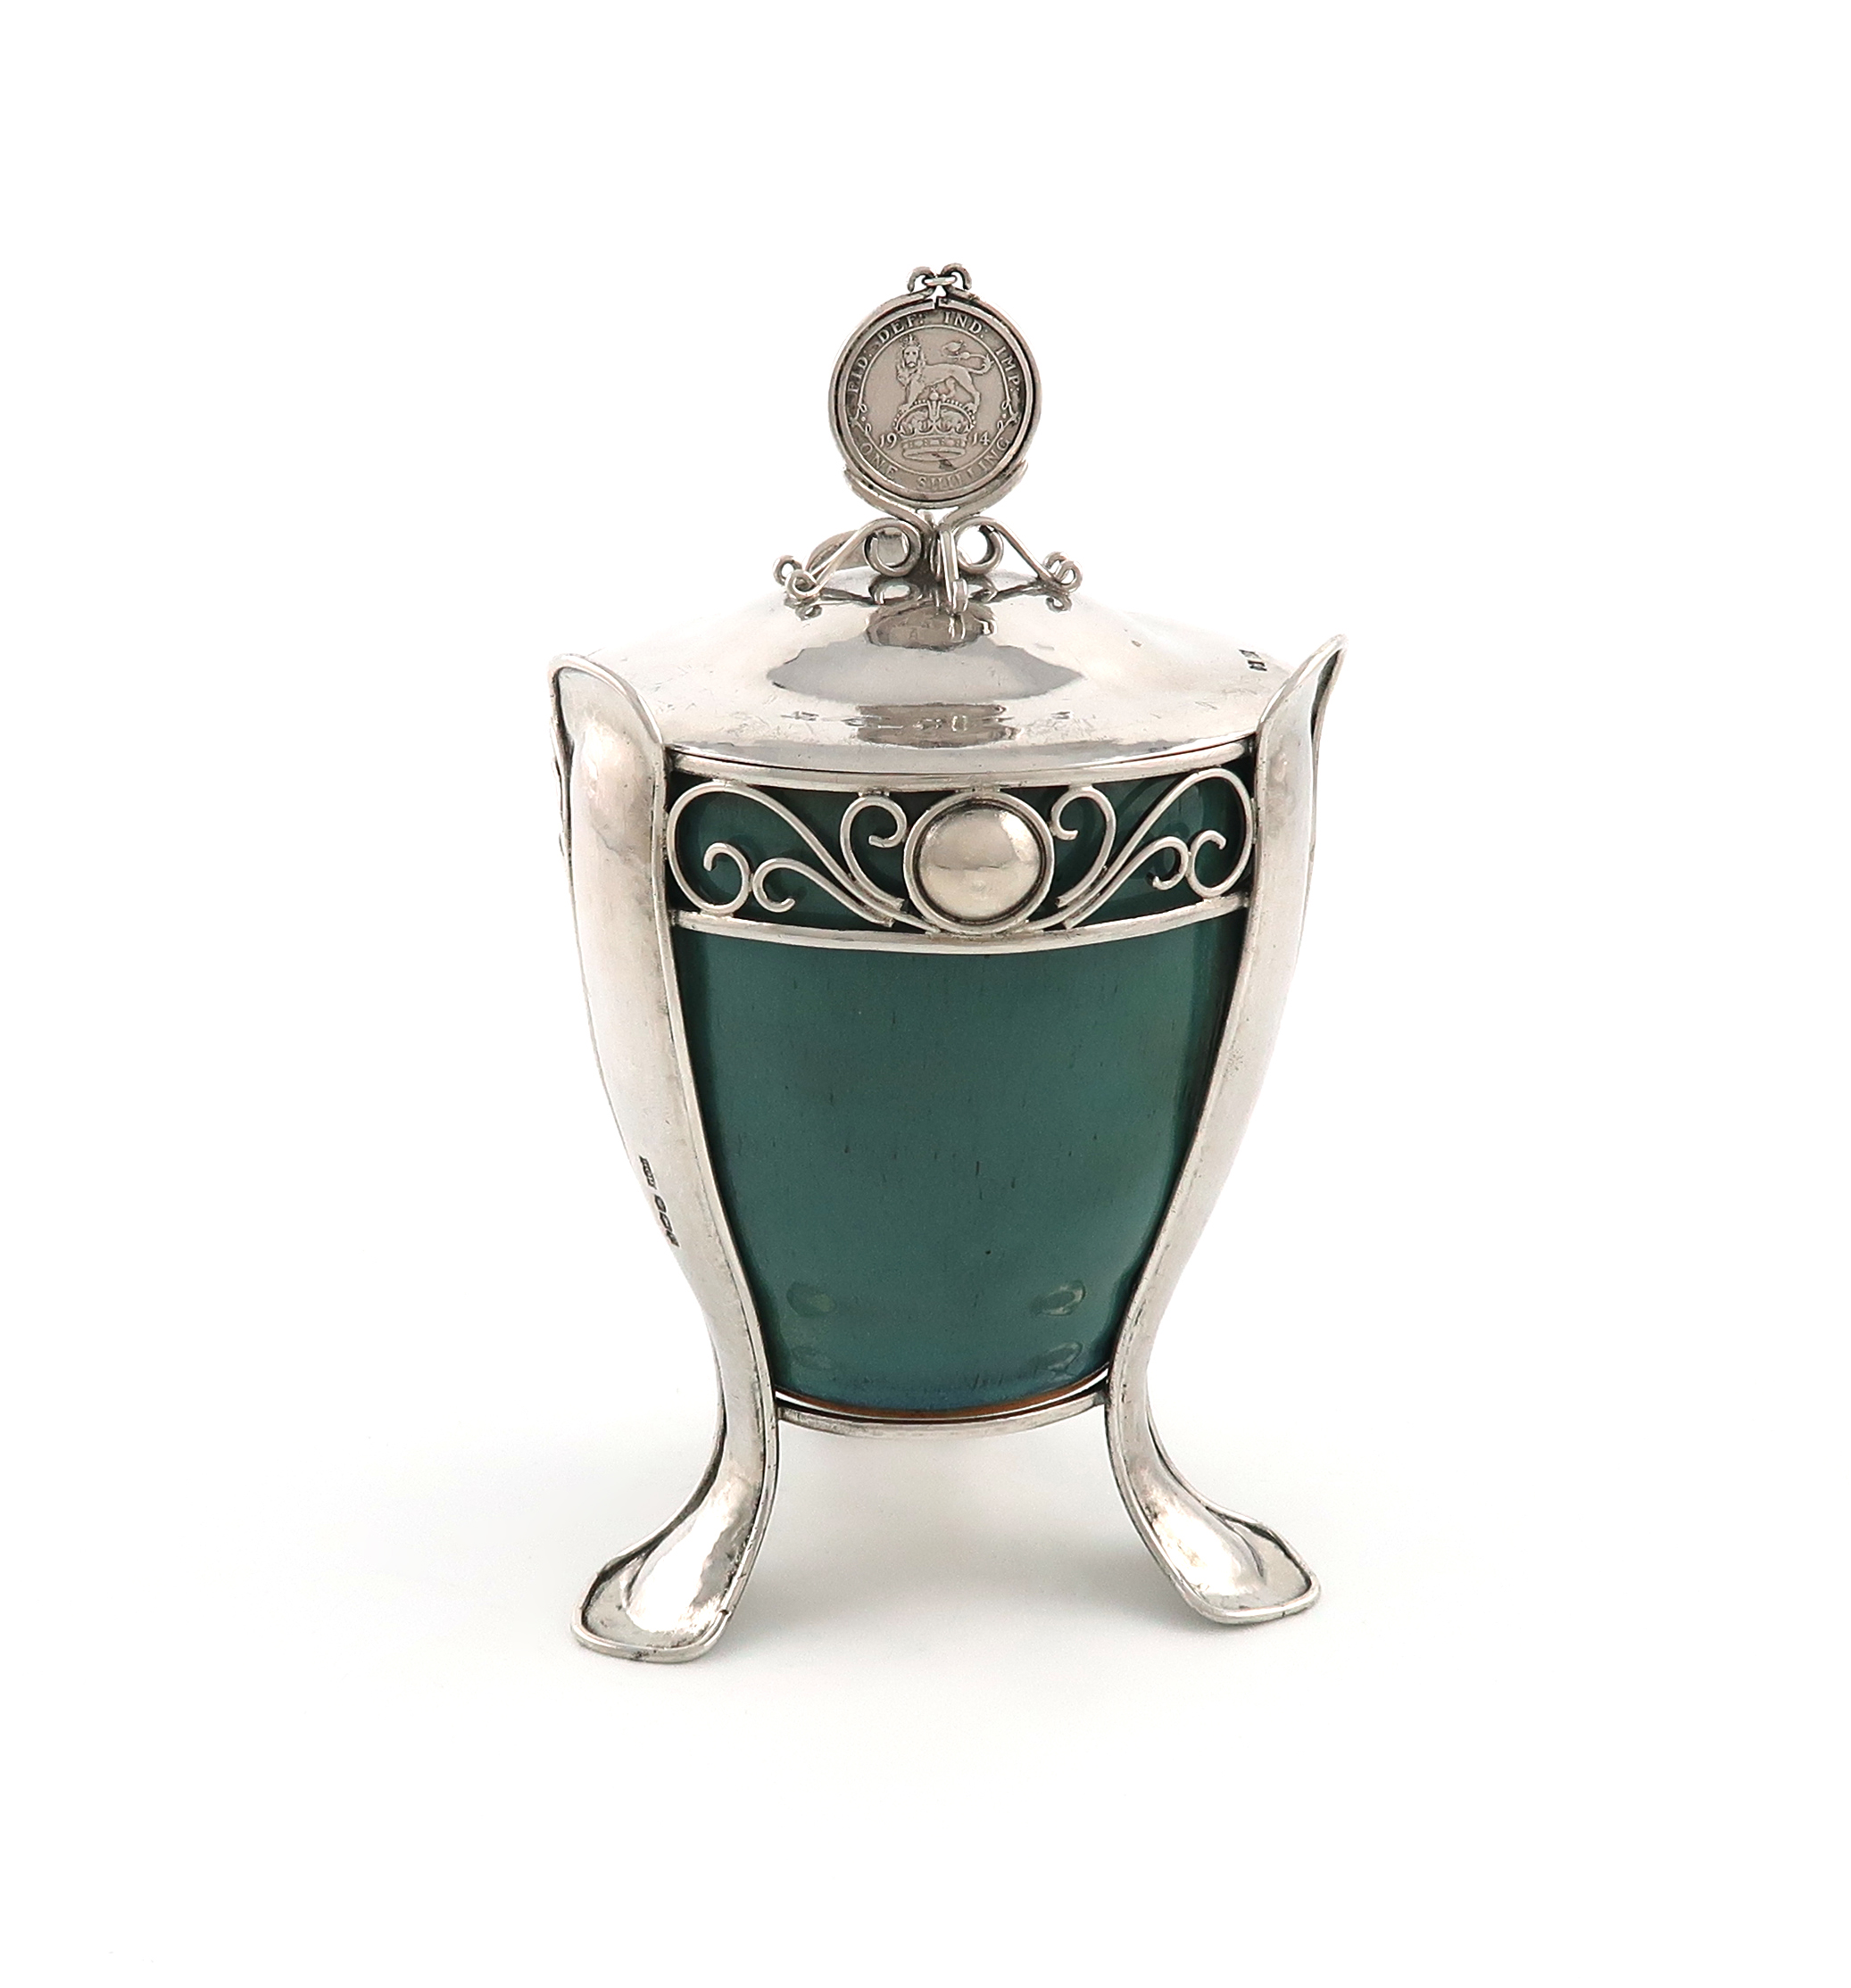 By Harry Charles Hall, an Arts and Crafts silver-mounted ceramic preserve jar and cover, Sheffield